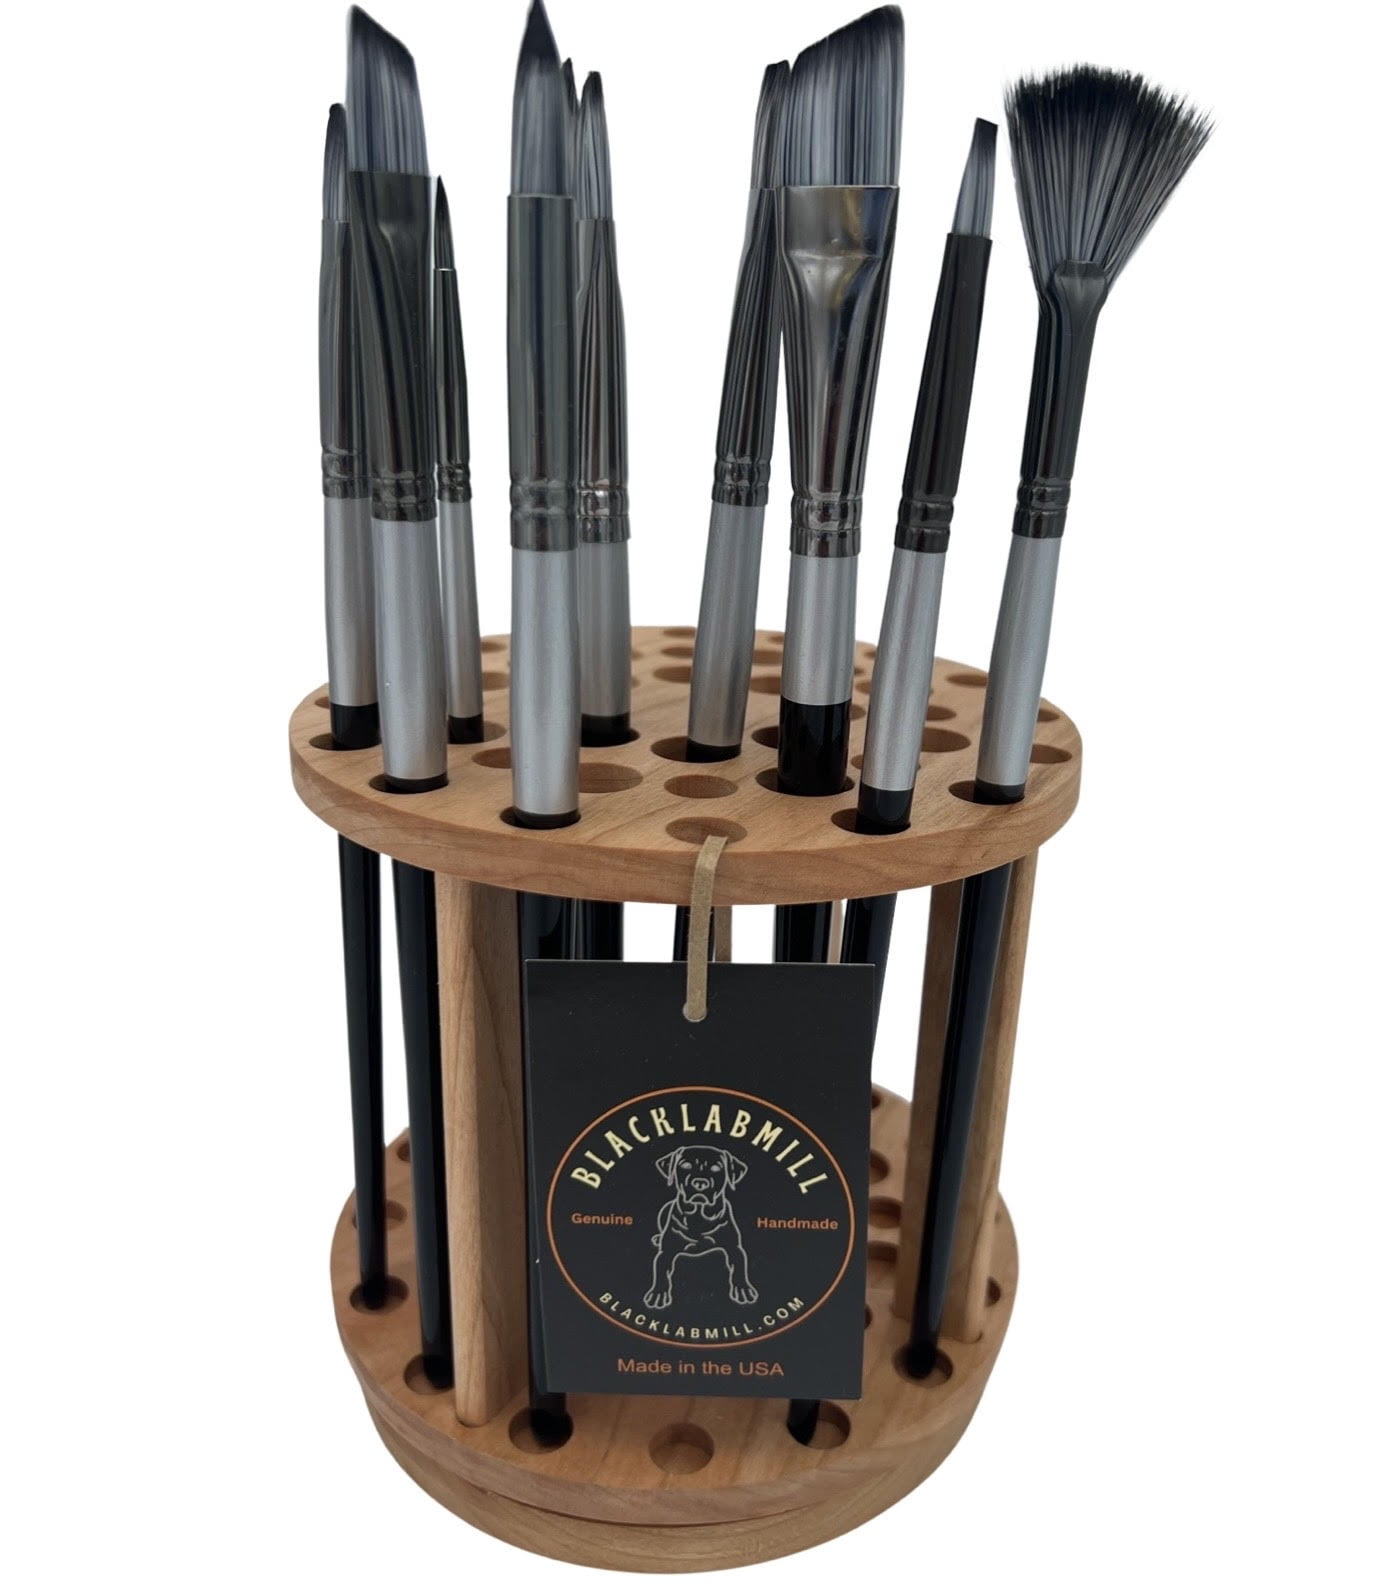 Easy To Use Products Brush Grip Paintbrush Holder and Drying Rack/Caddy,  Painting Supplies (Black)